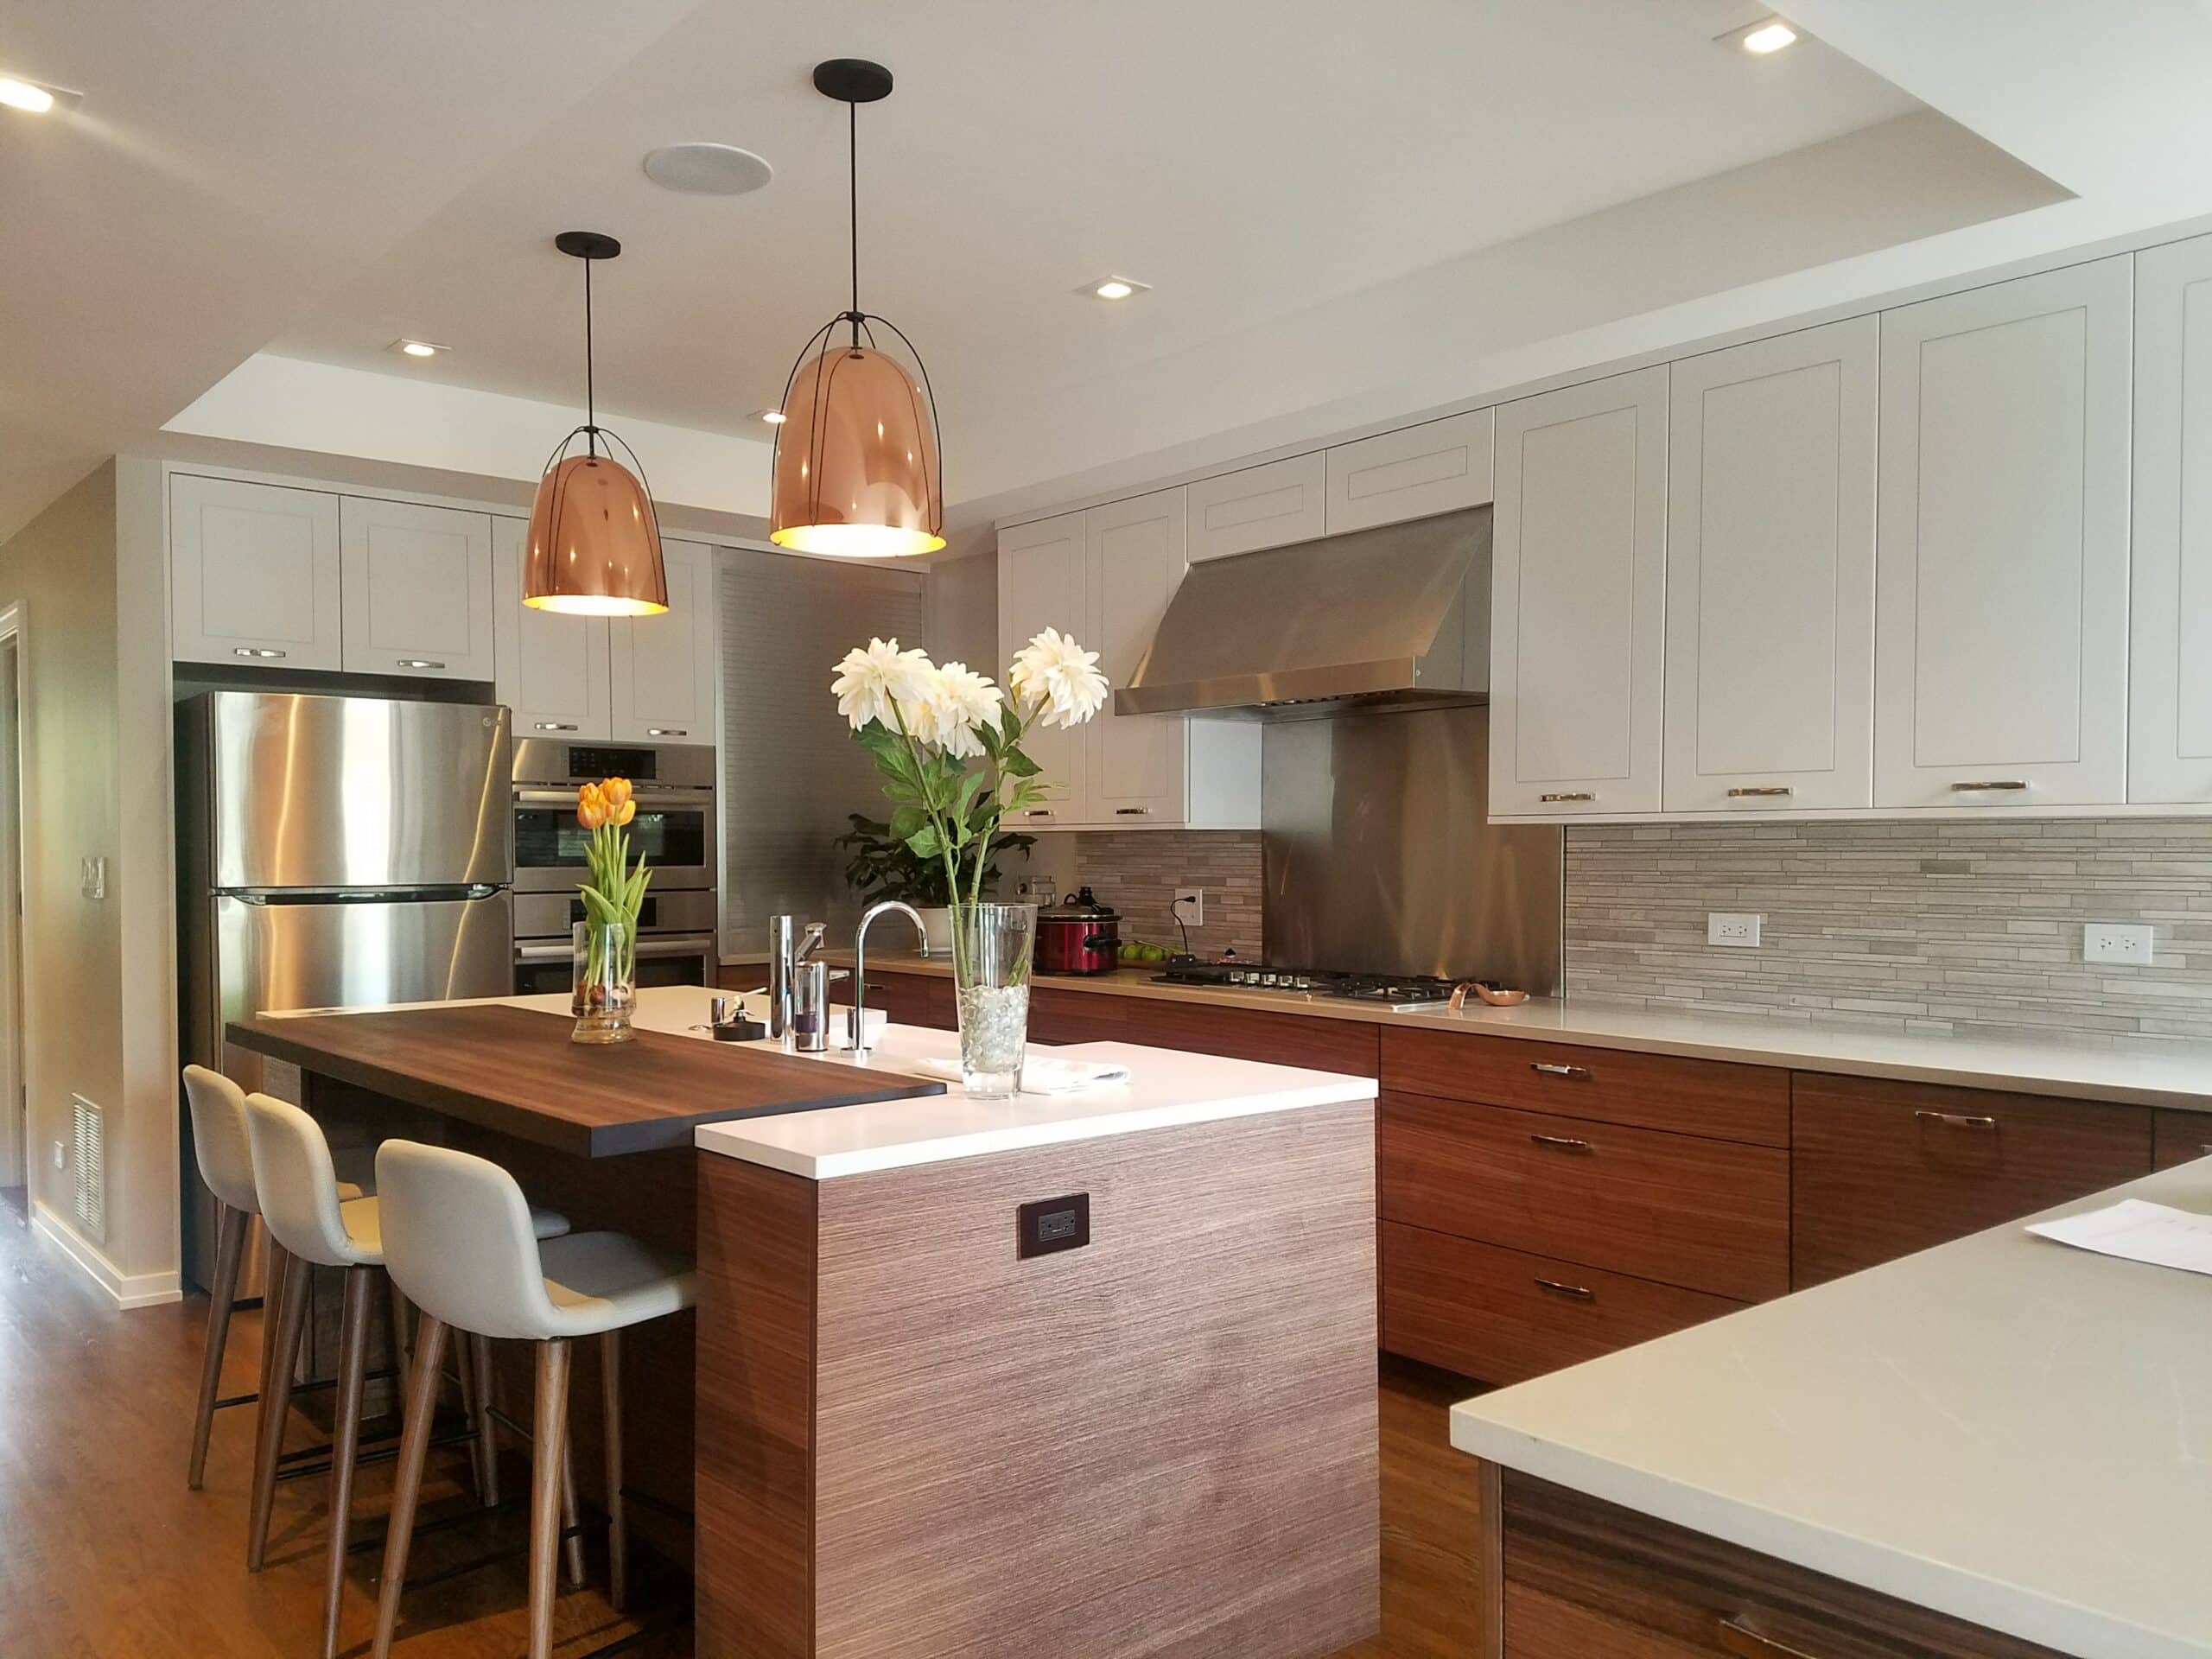 A kitchen update featuring an island that incorporates a clean wood aesthetic with white, modern finishes.